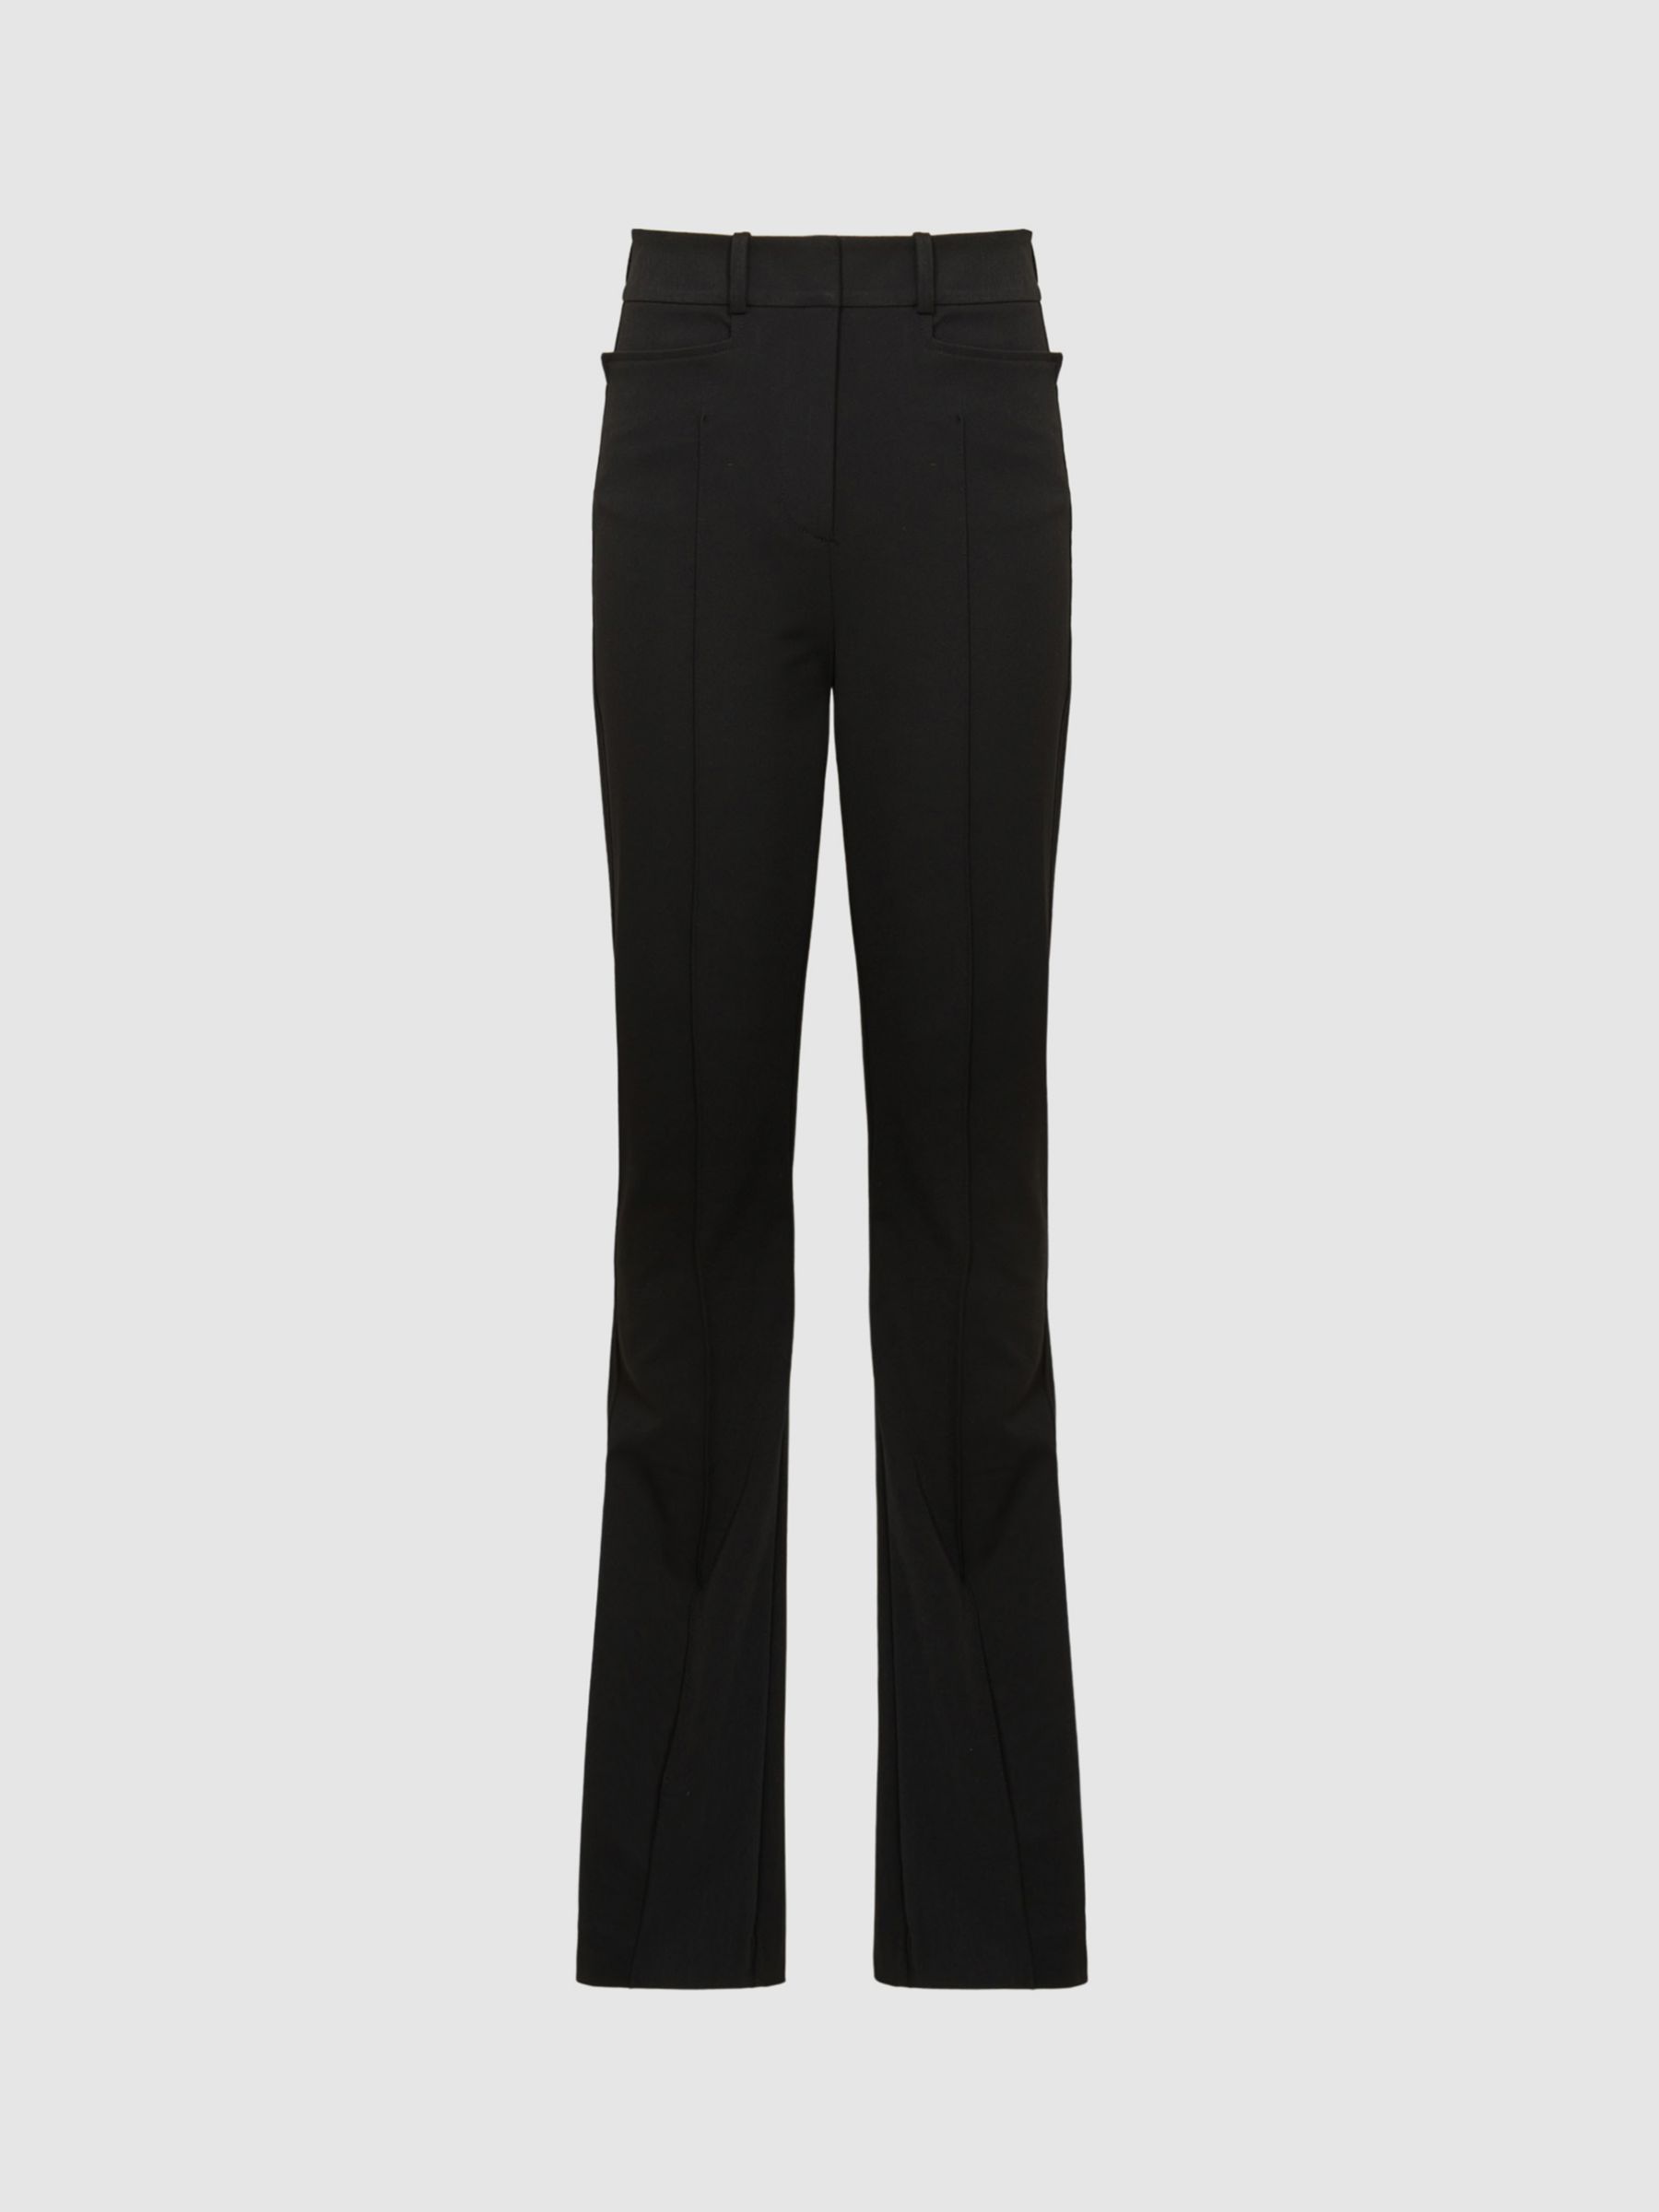 Reiss Petite Dylan Flared Trousers, Black at John Lewis & Partners